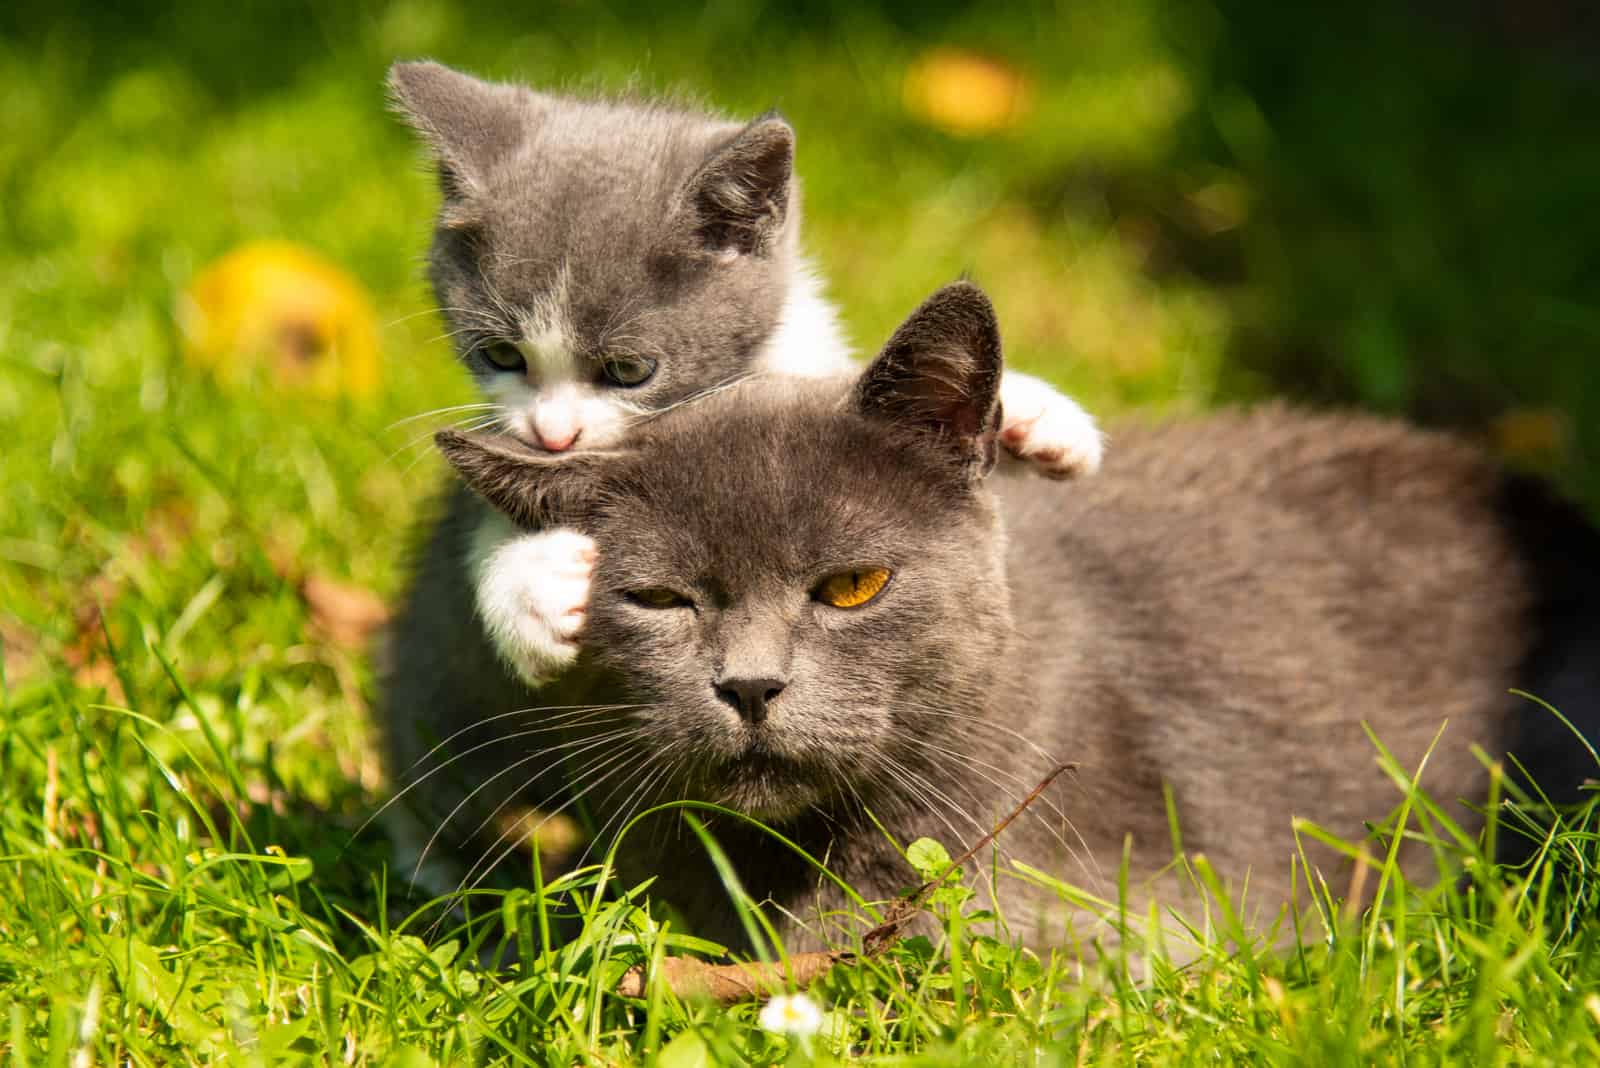 cat lying on grass with kitten playing